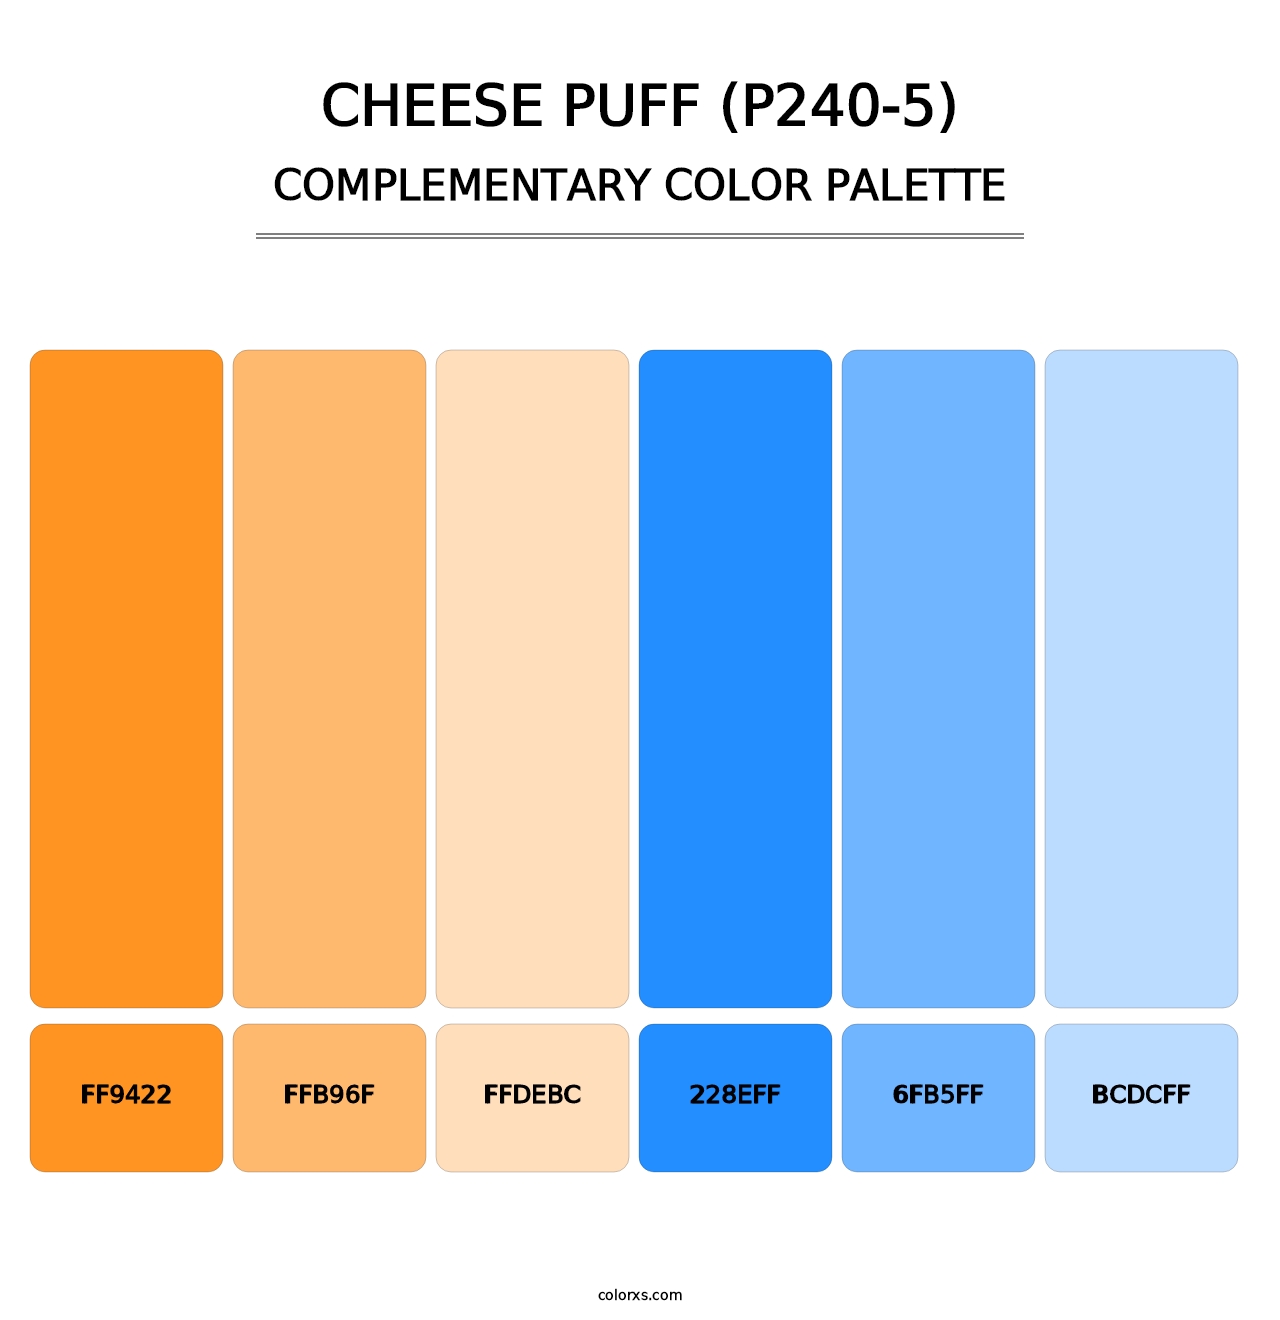 Cheese Puff (P240-5) - Complementary Color Palette